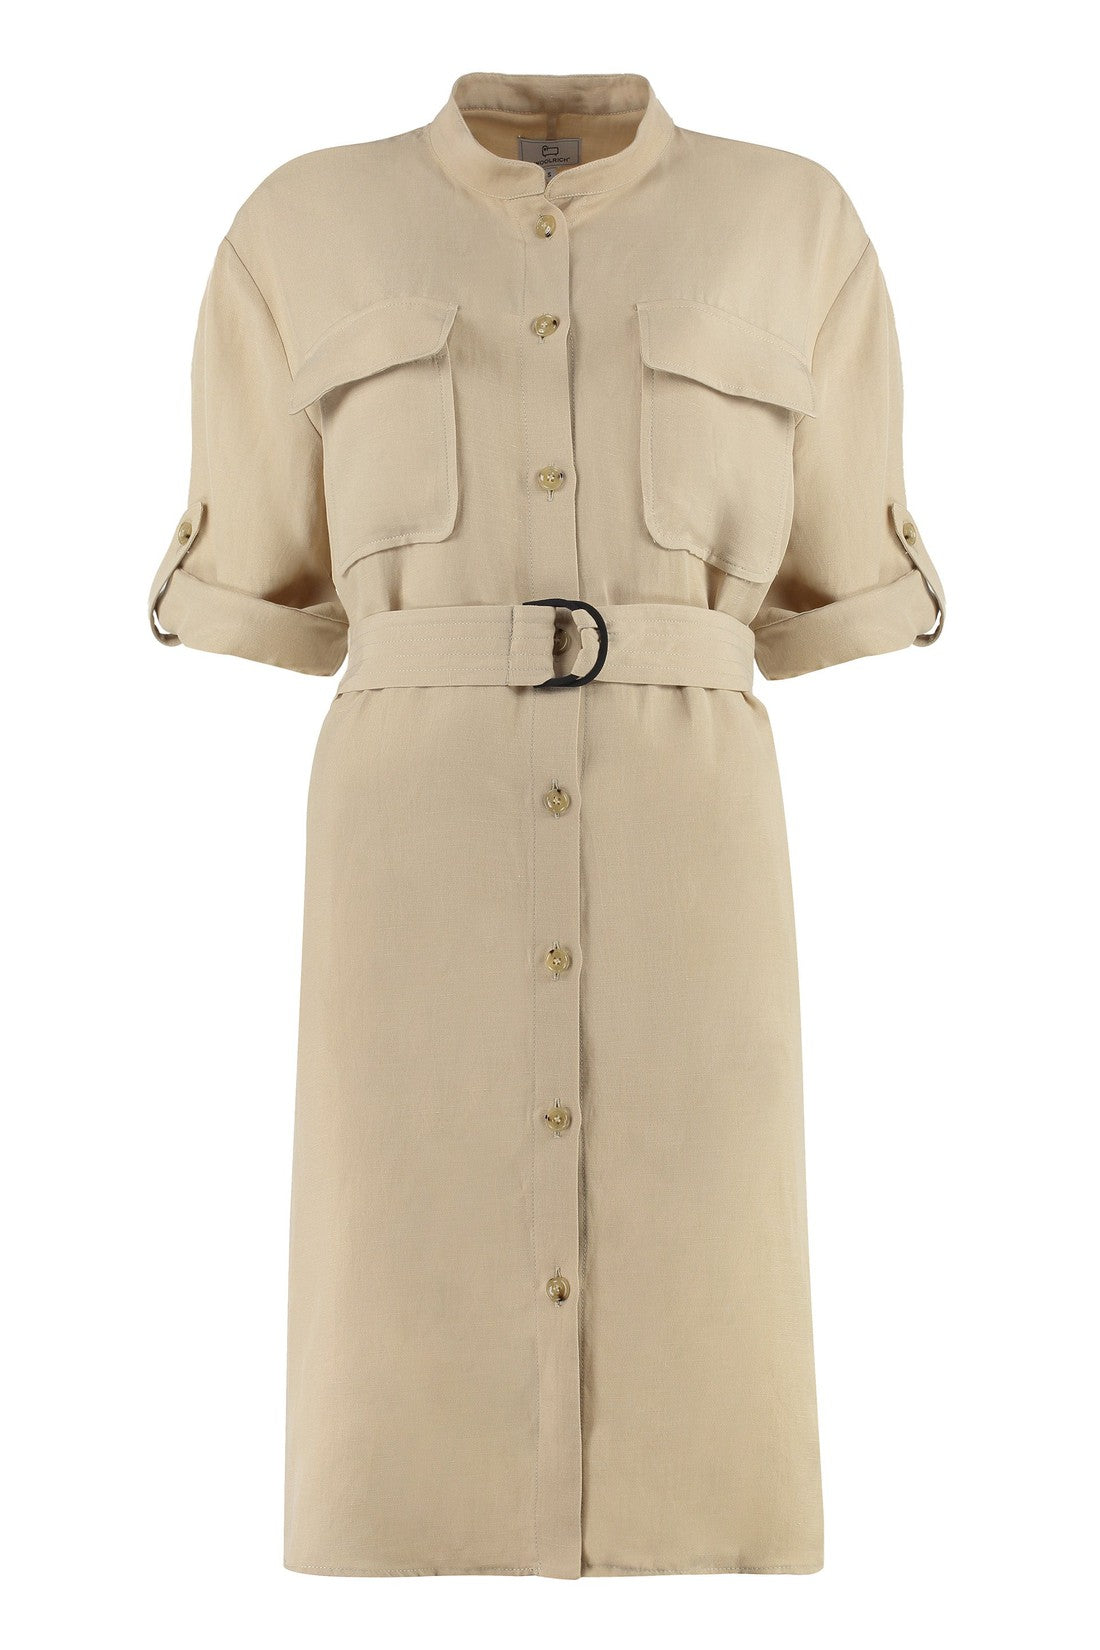 Woolrich-OUTLET-SALE-Belted shirtdress-ARCHIVIST